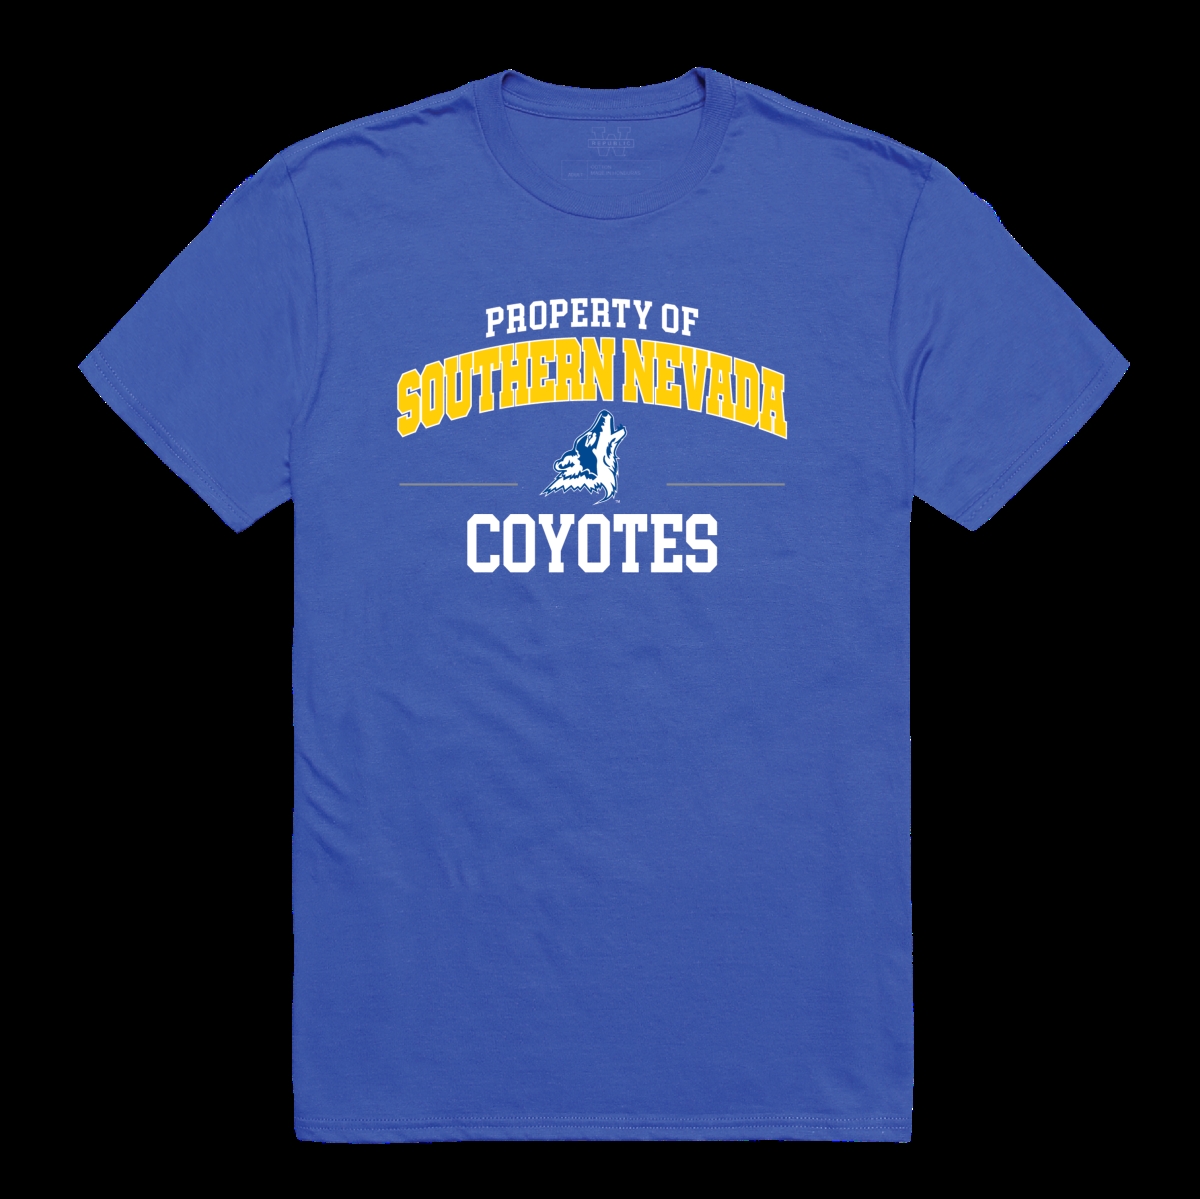 W Republic 517-672-RYL-01 College of Southern Nevada Coyotes Property T-Shirt&#44; Royal - Small